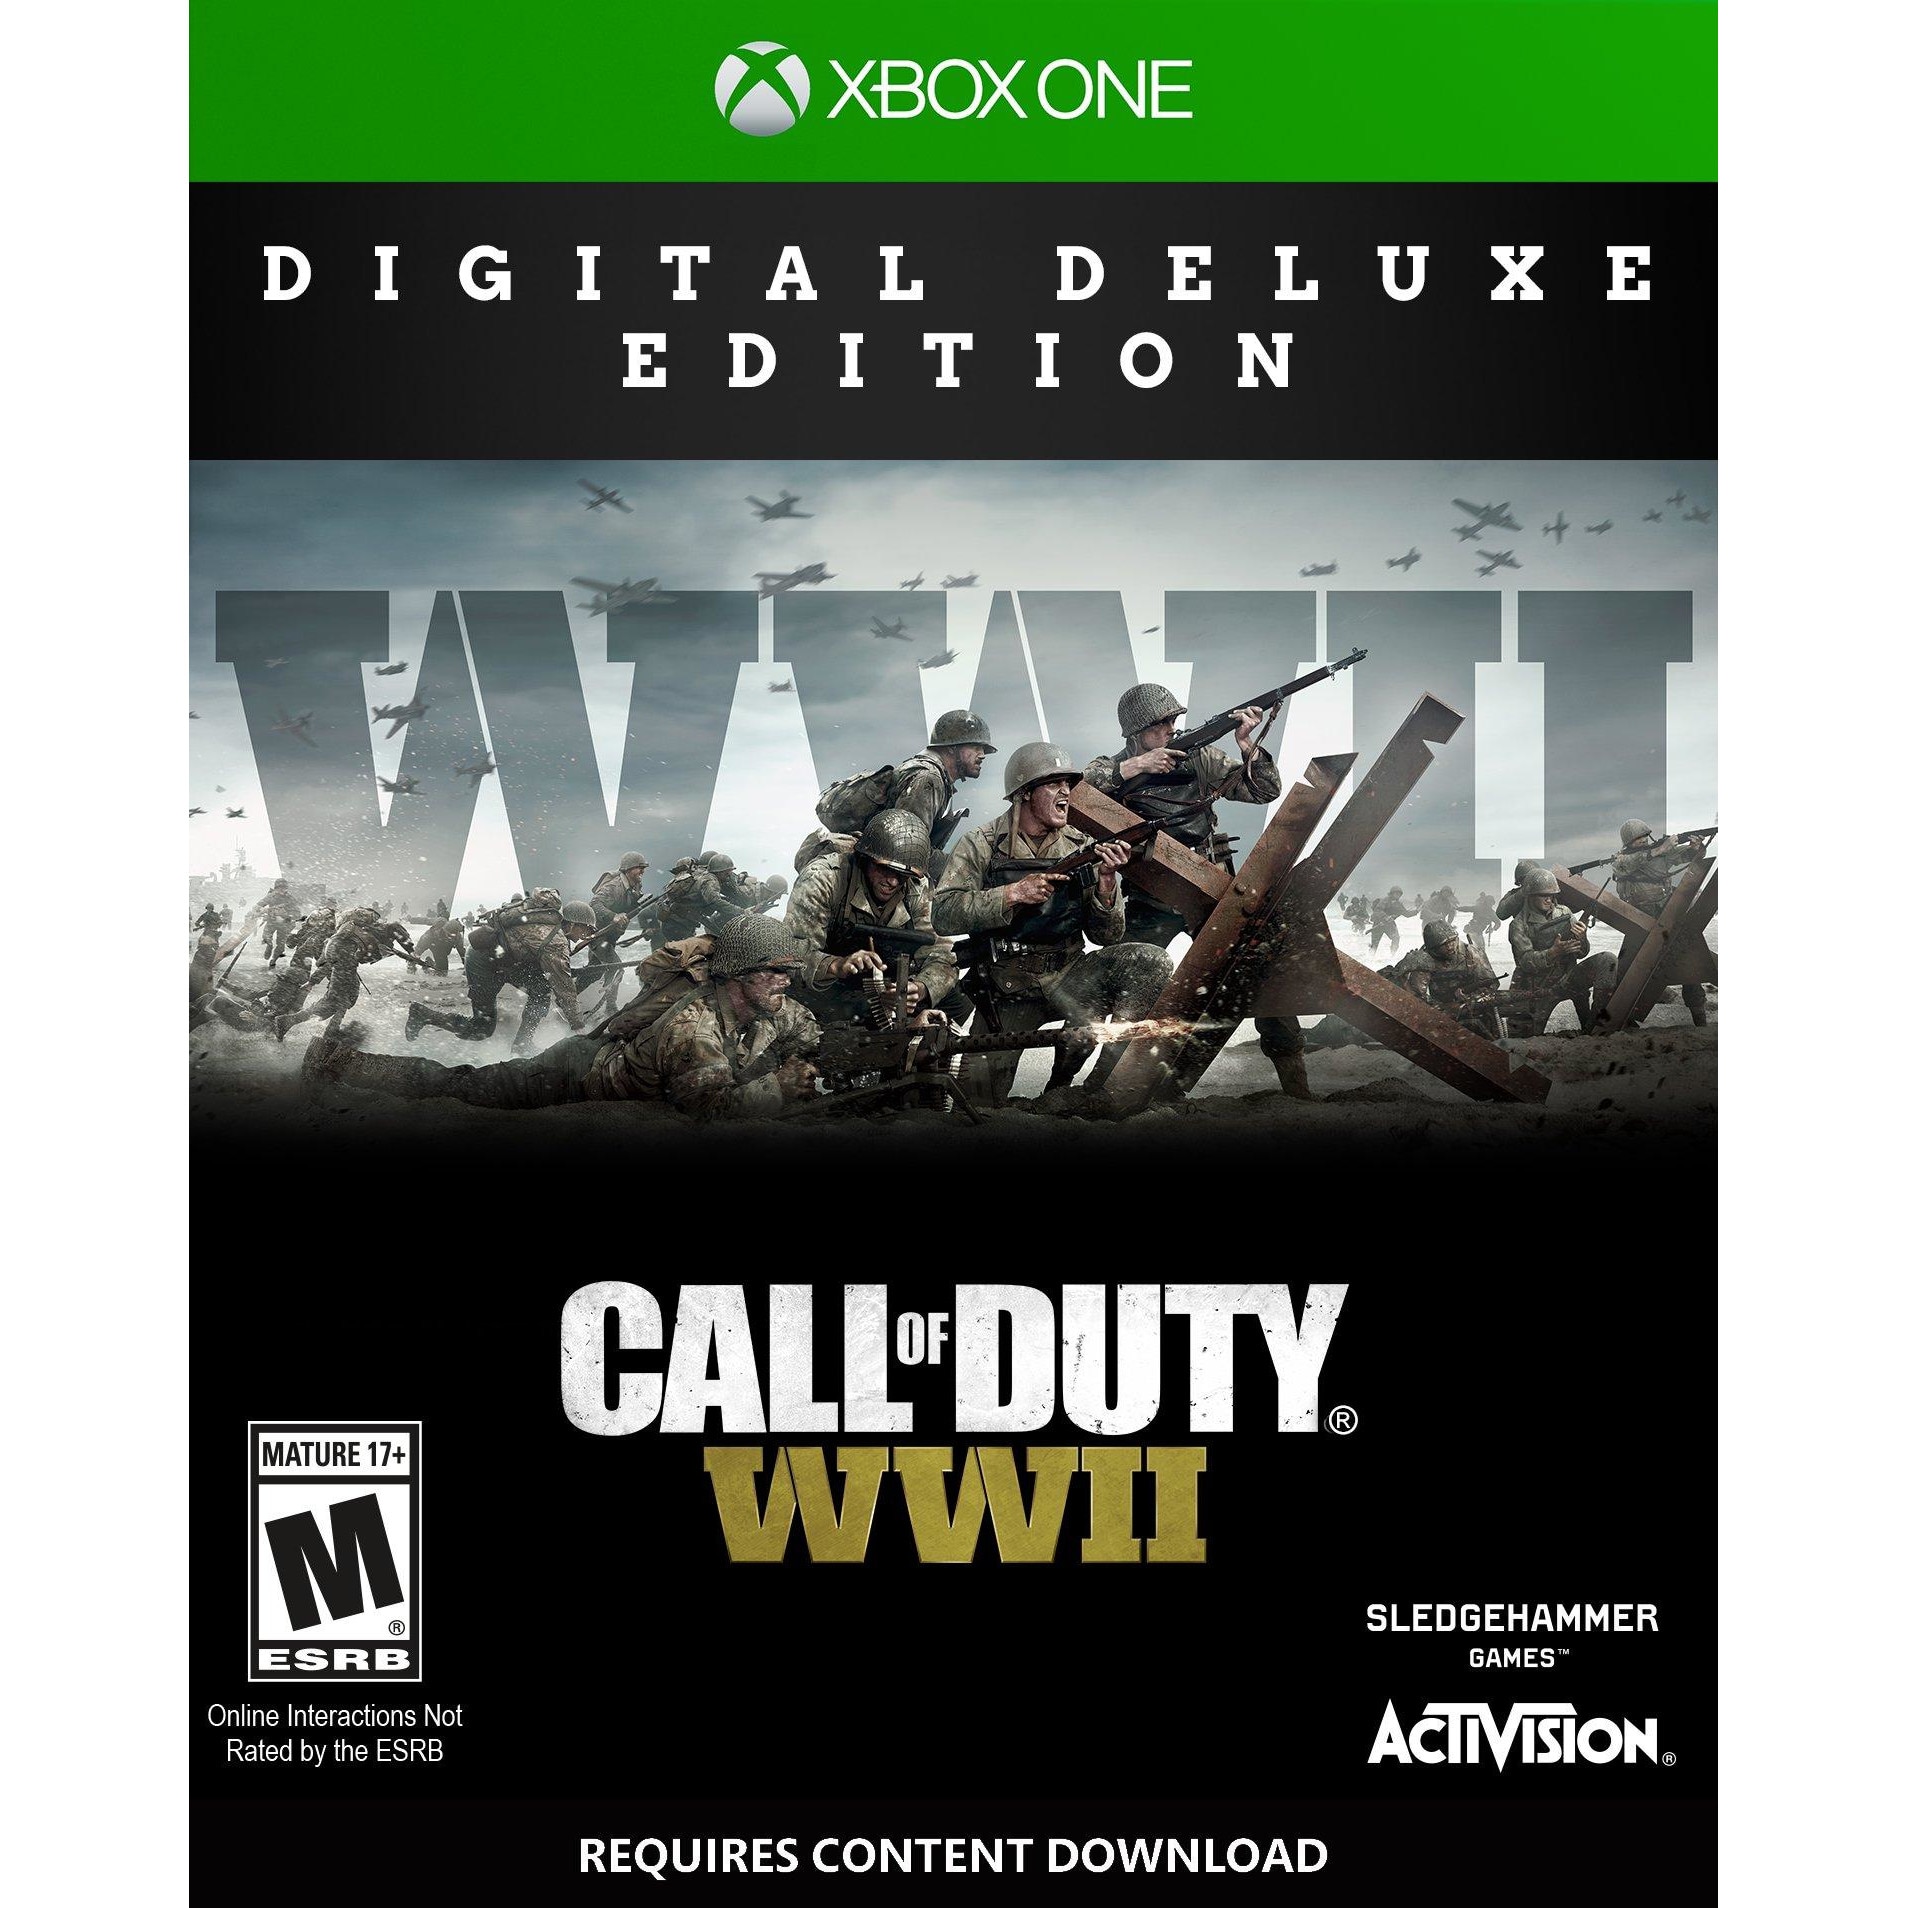 Call of Duty: WWII - Call of Duty Endowment Bravery Pack (DLC) Steam Key  GLOBAL